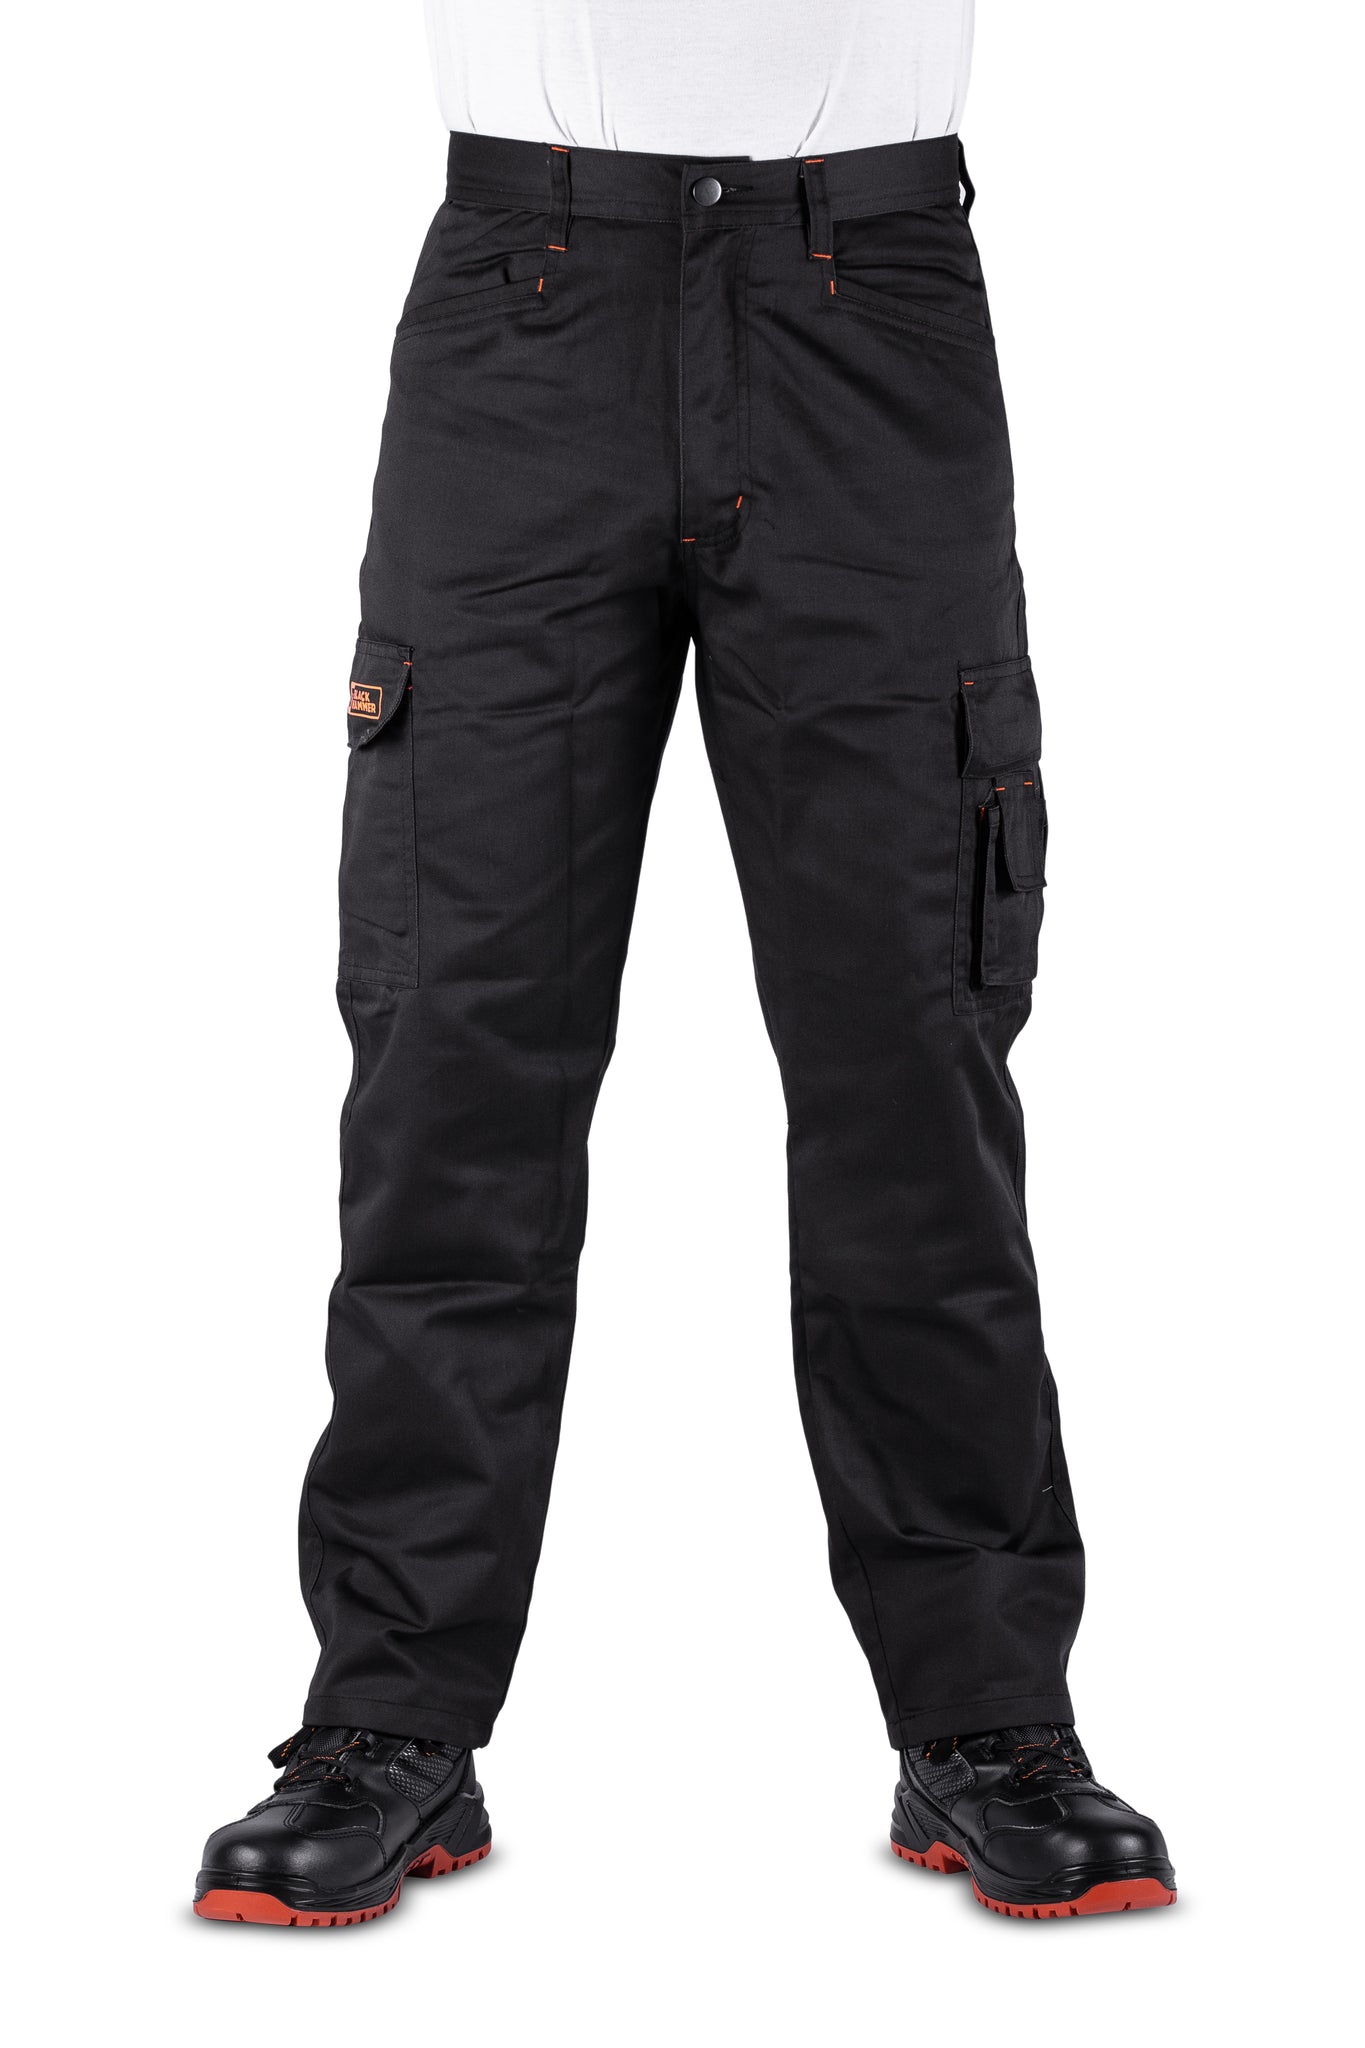 Newfacelook Work Trousers for Men Cargo Safety Work India  Ubuy